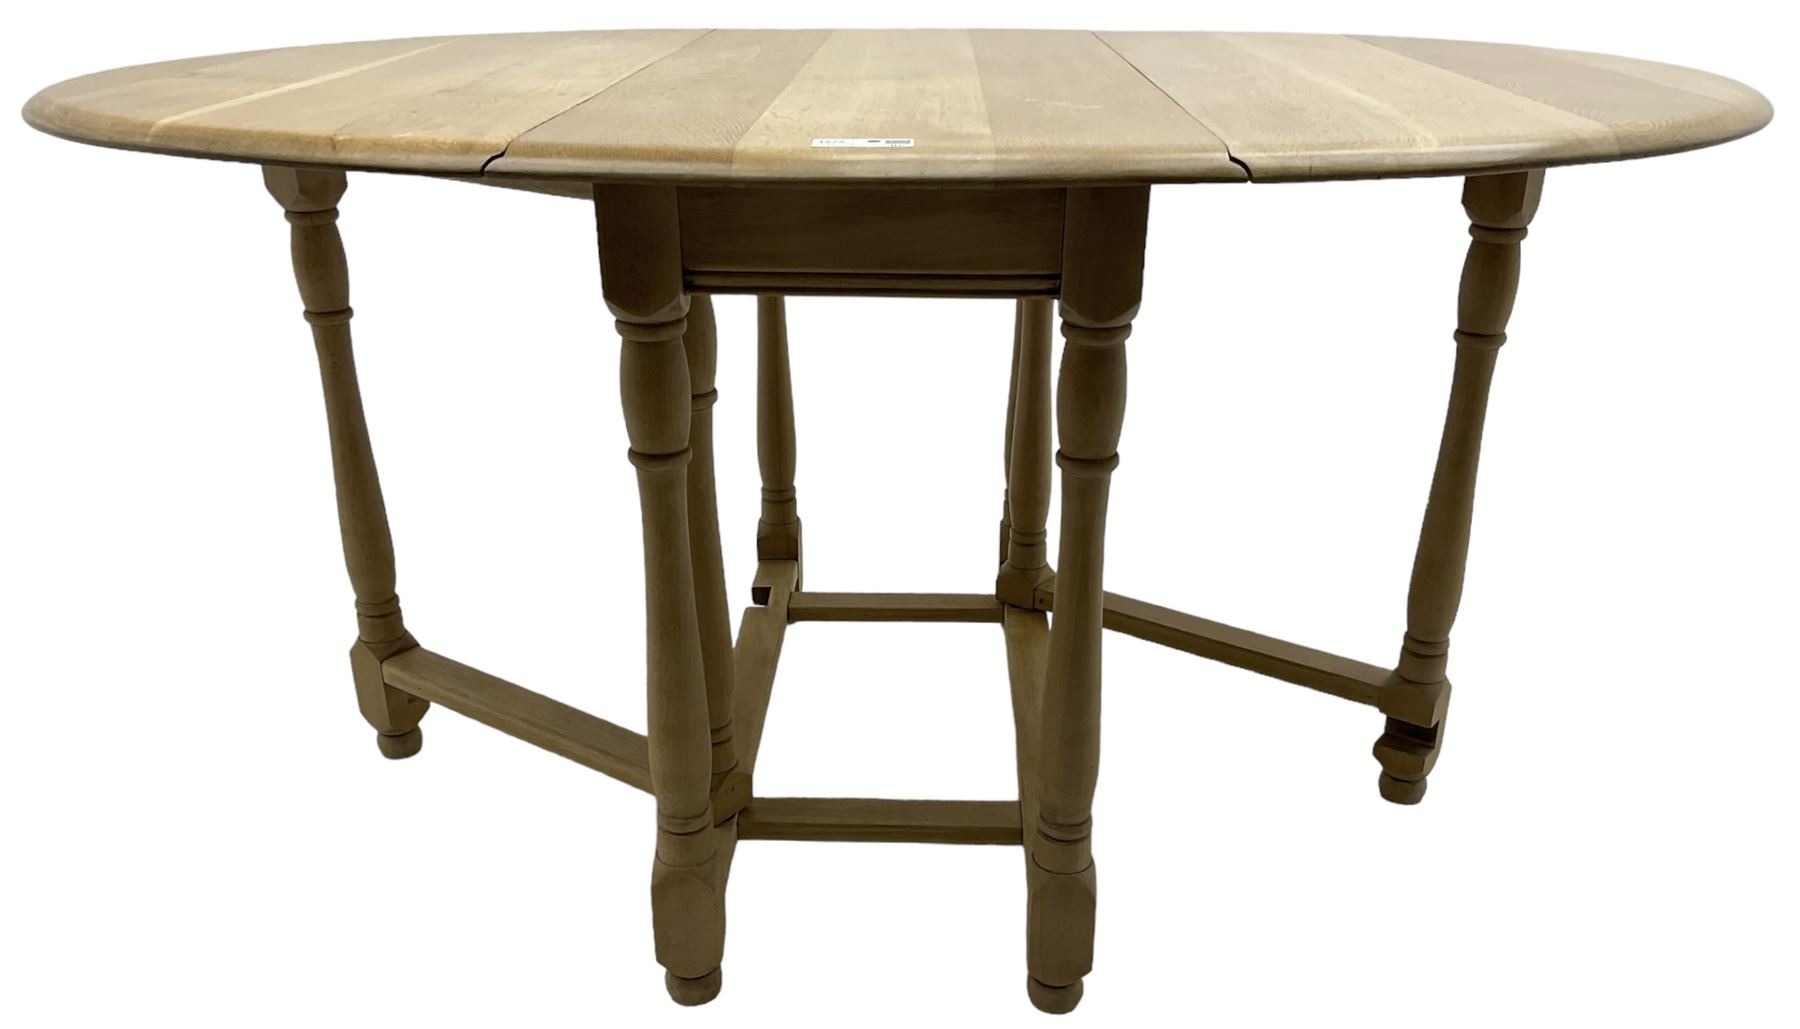 Contemporary oak and beech dining table - Image 3 of 6